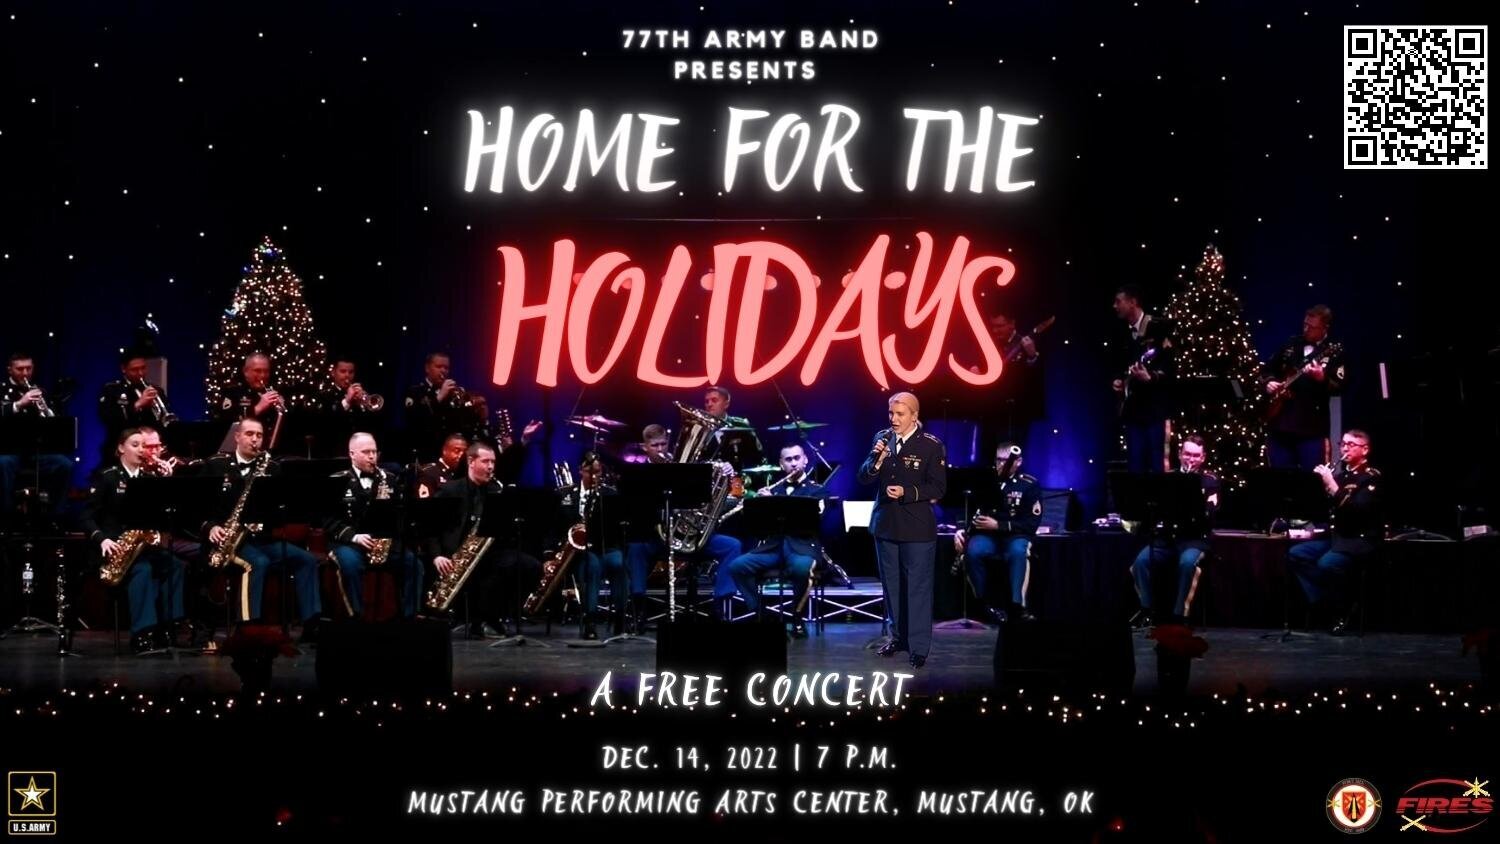 77th Army Band Home for the Holidays Concert QR Code 5